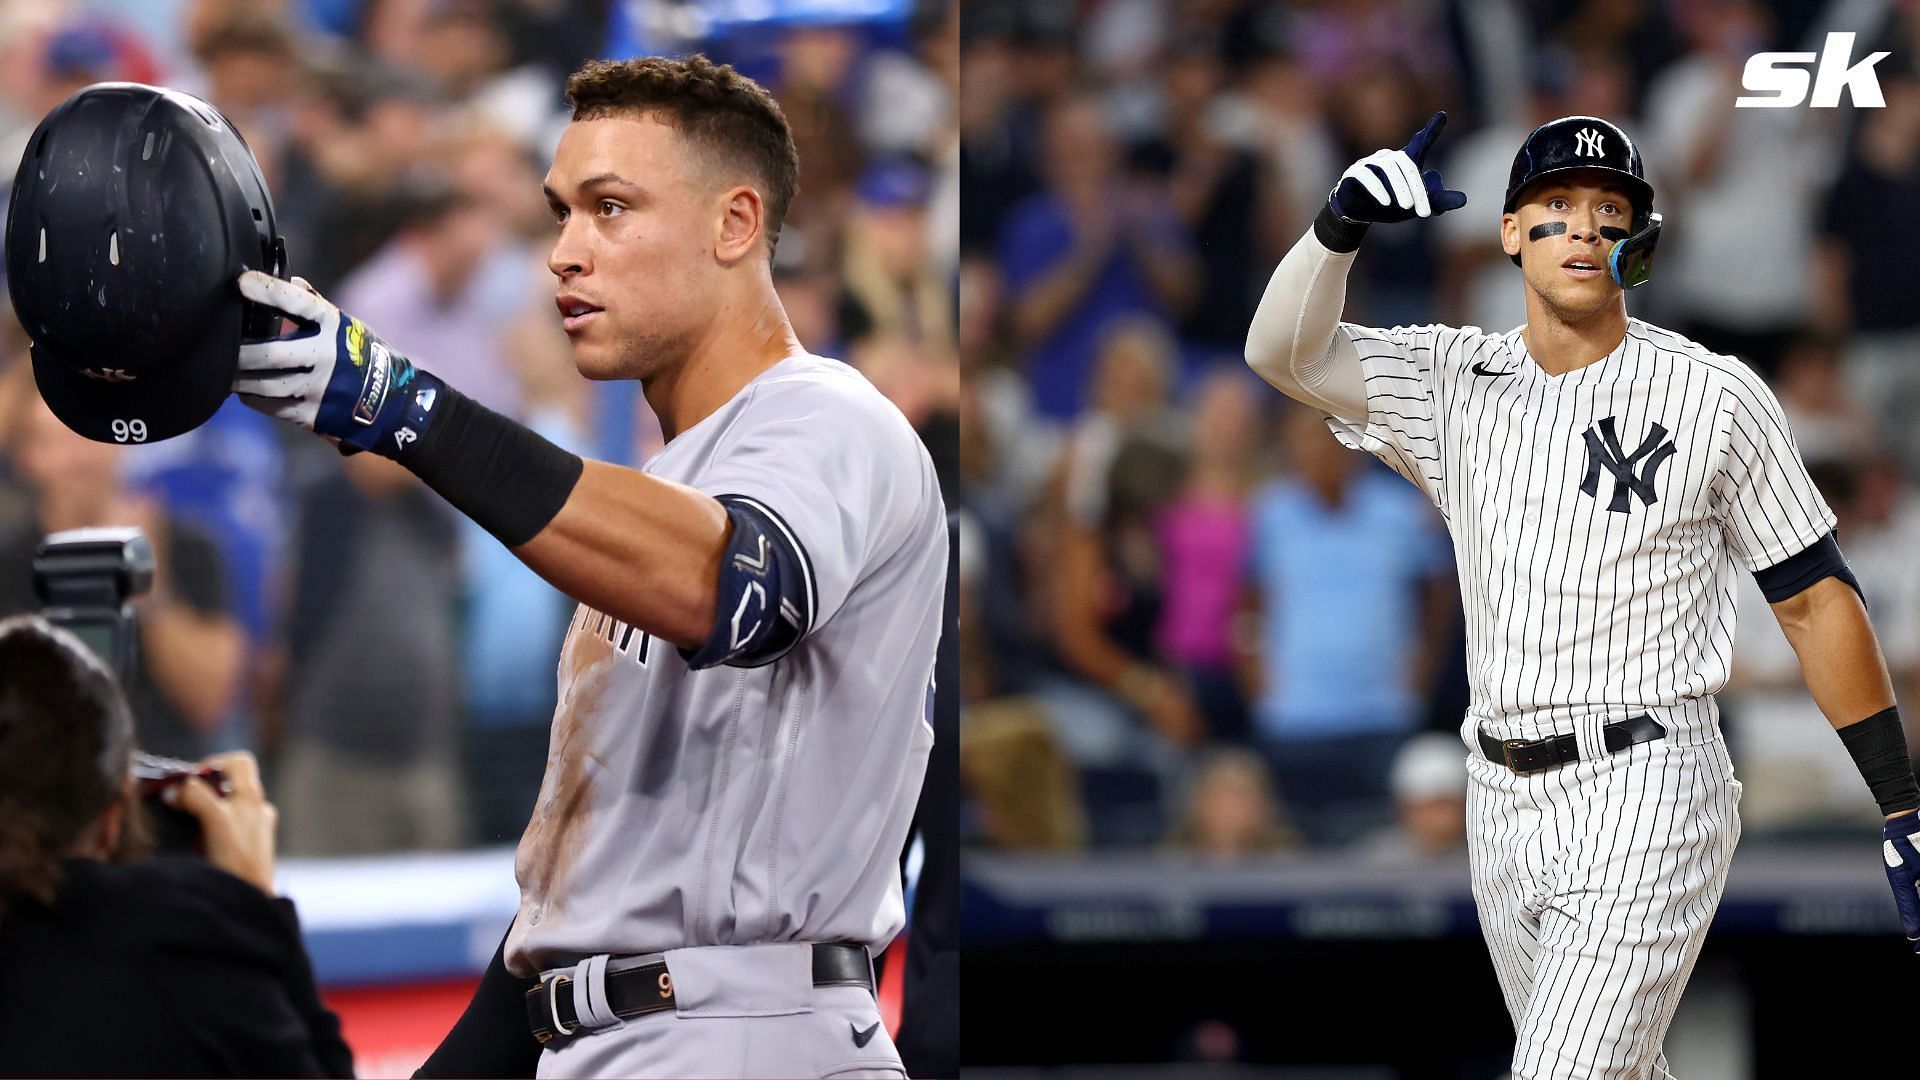 Aaron Judge bobblehead promotion was rescheduled, upsetting several fans